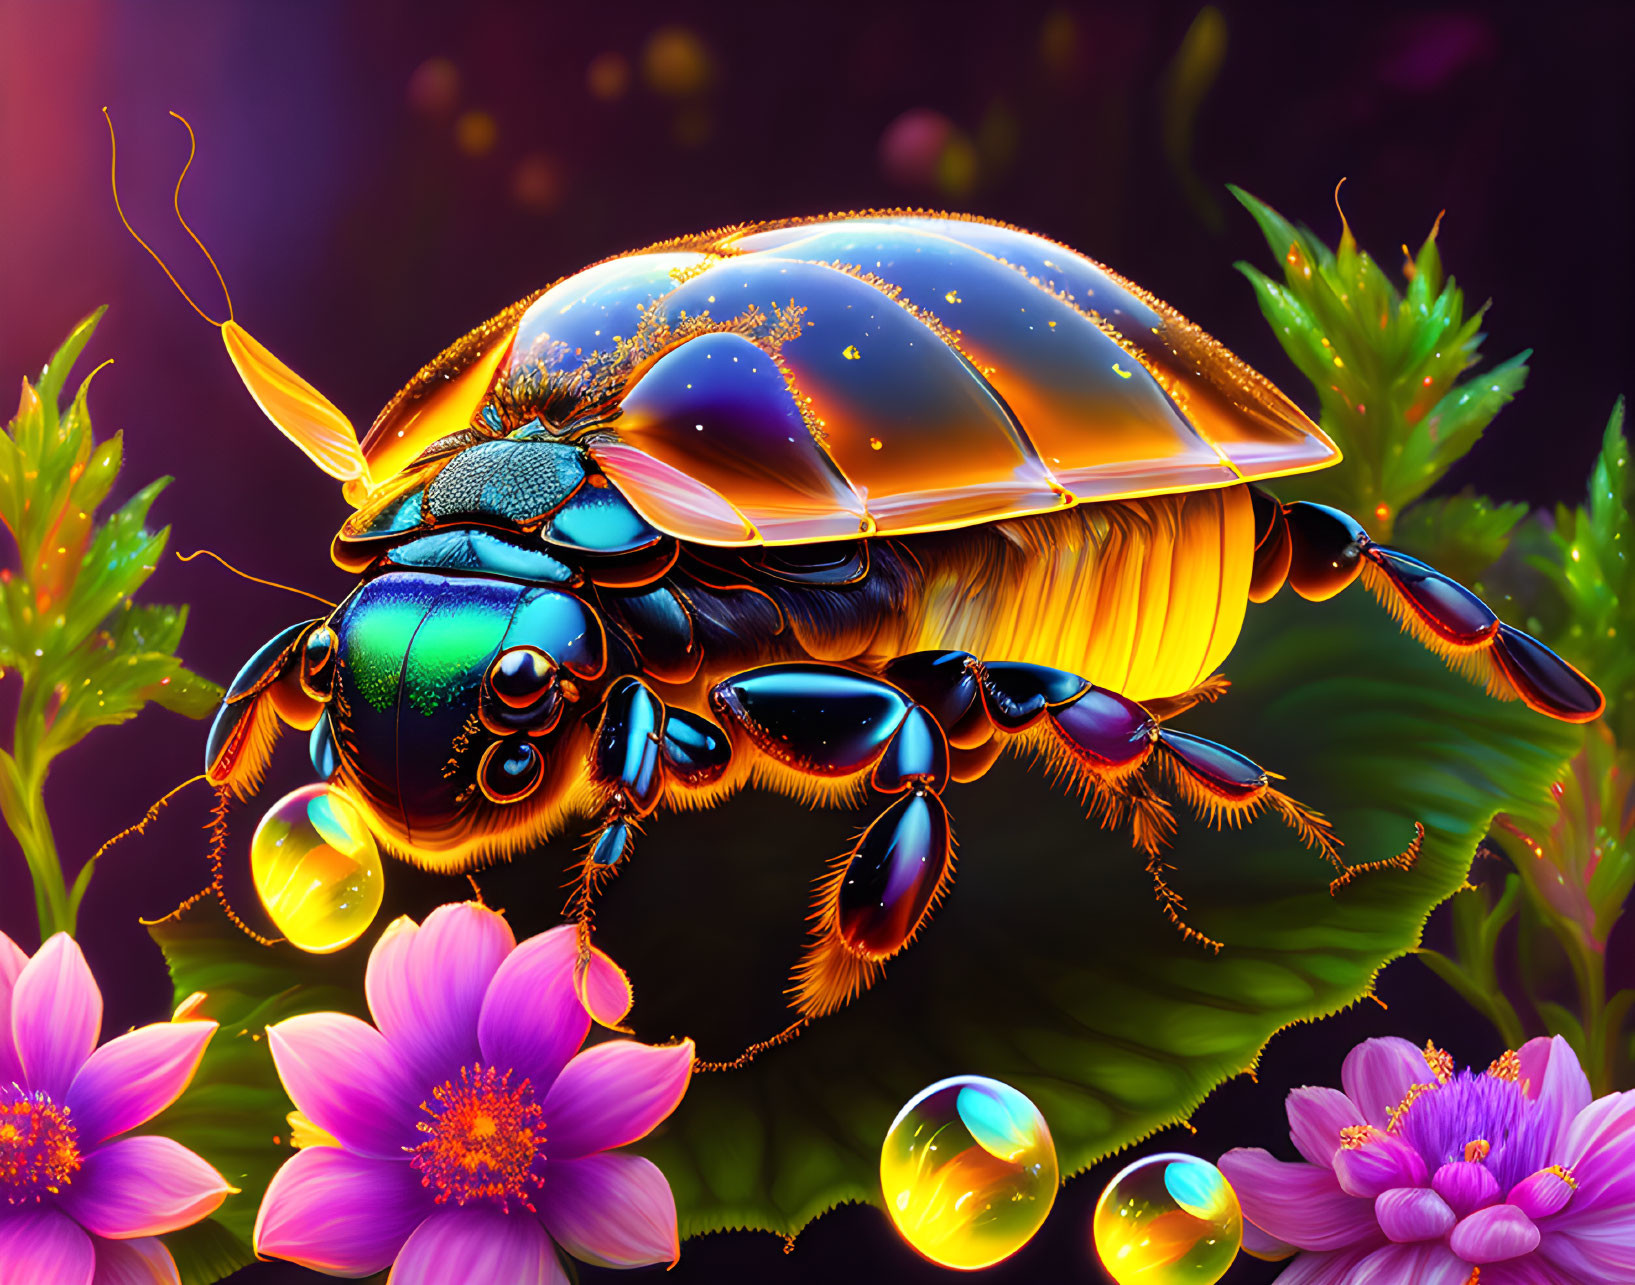 Colorful Beetle Illustration Among Flowers and Dewdrops